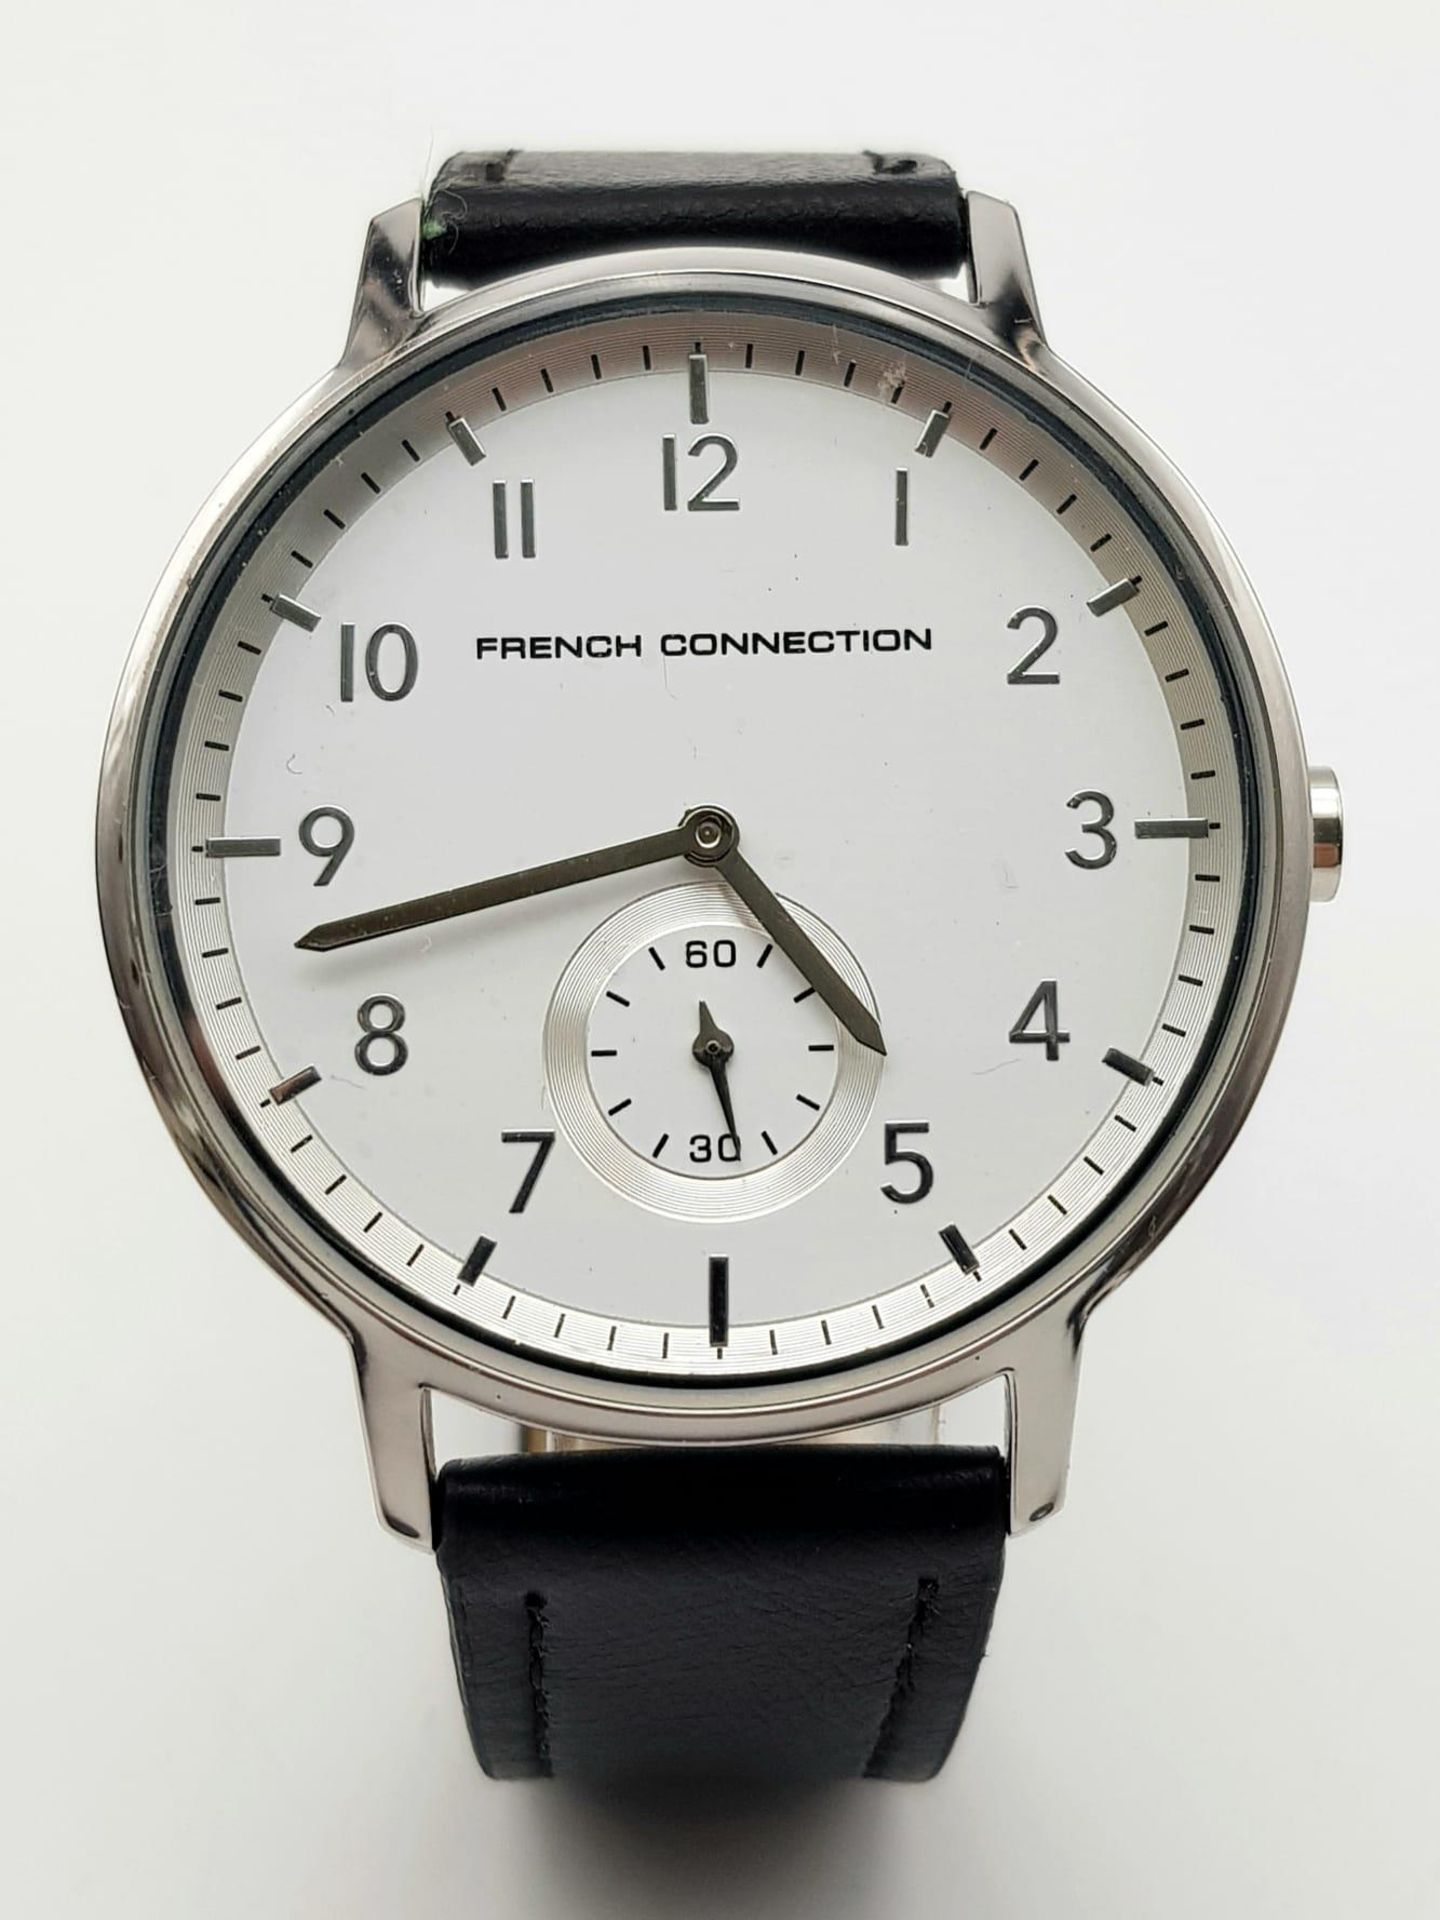 An Unused Subsidiary Dial Quartz Watch by French Connection. 44mm Including Dial. Full Working - Image 2 of 6